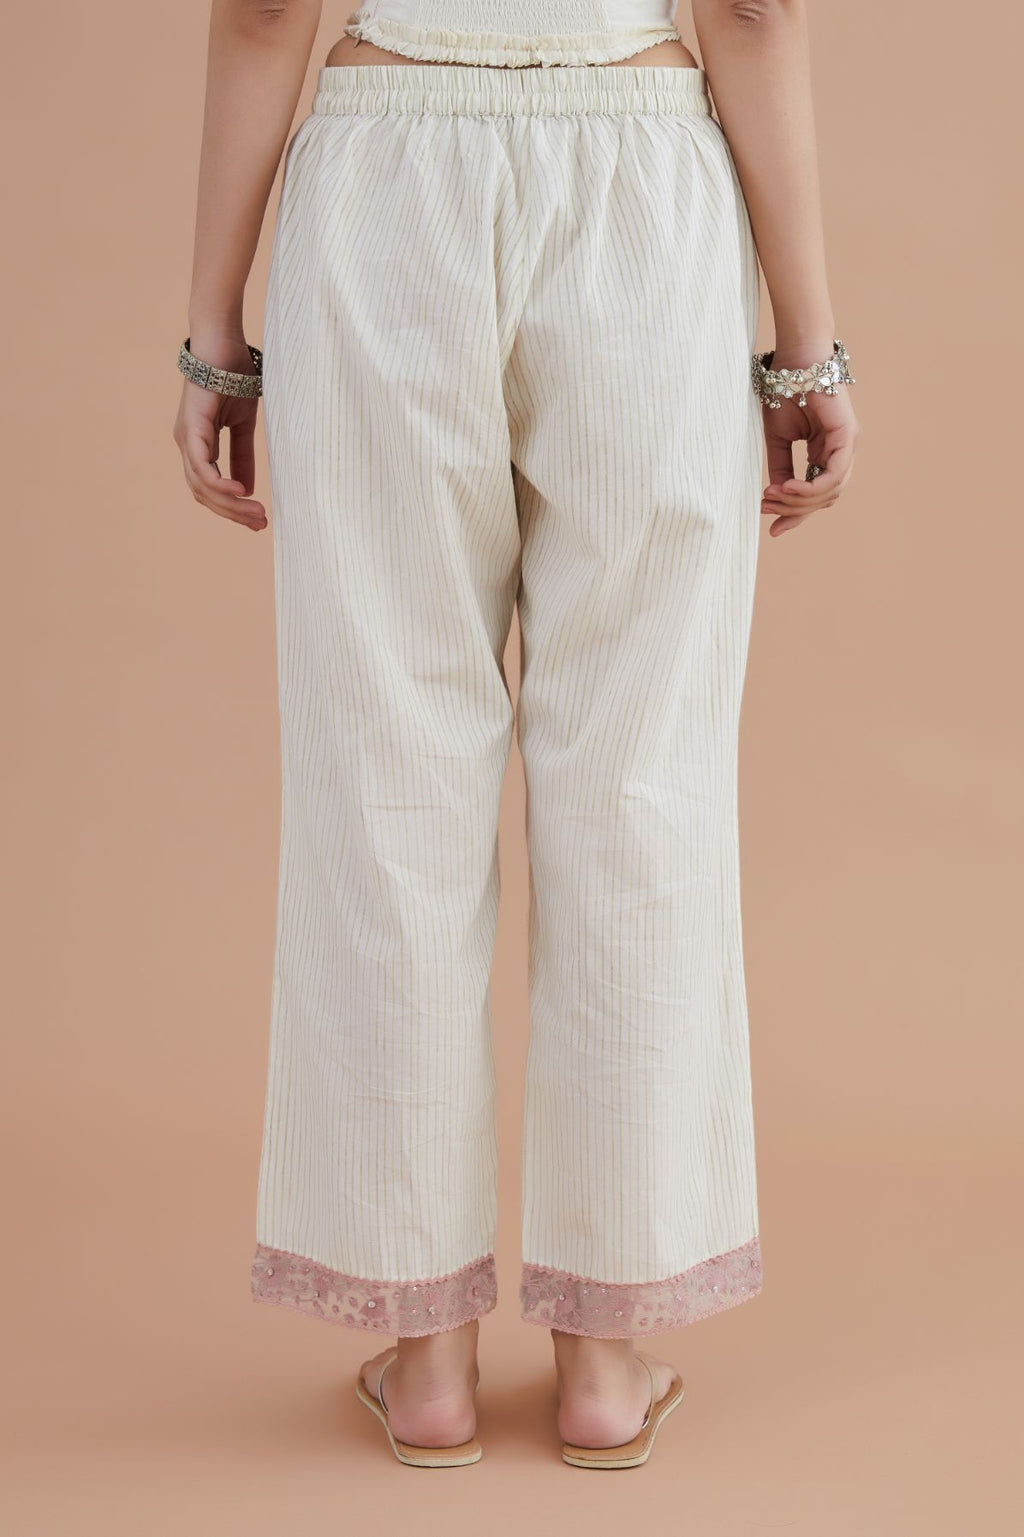 Off white straight pants detailed with pink embroidery at bottom.